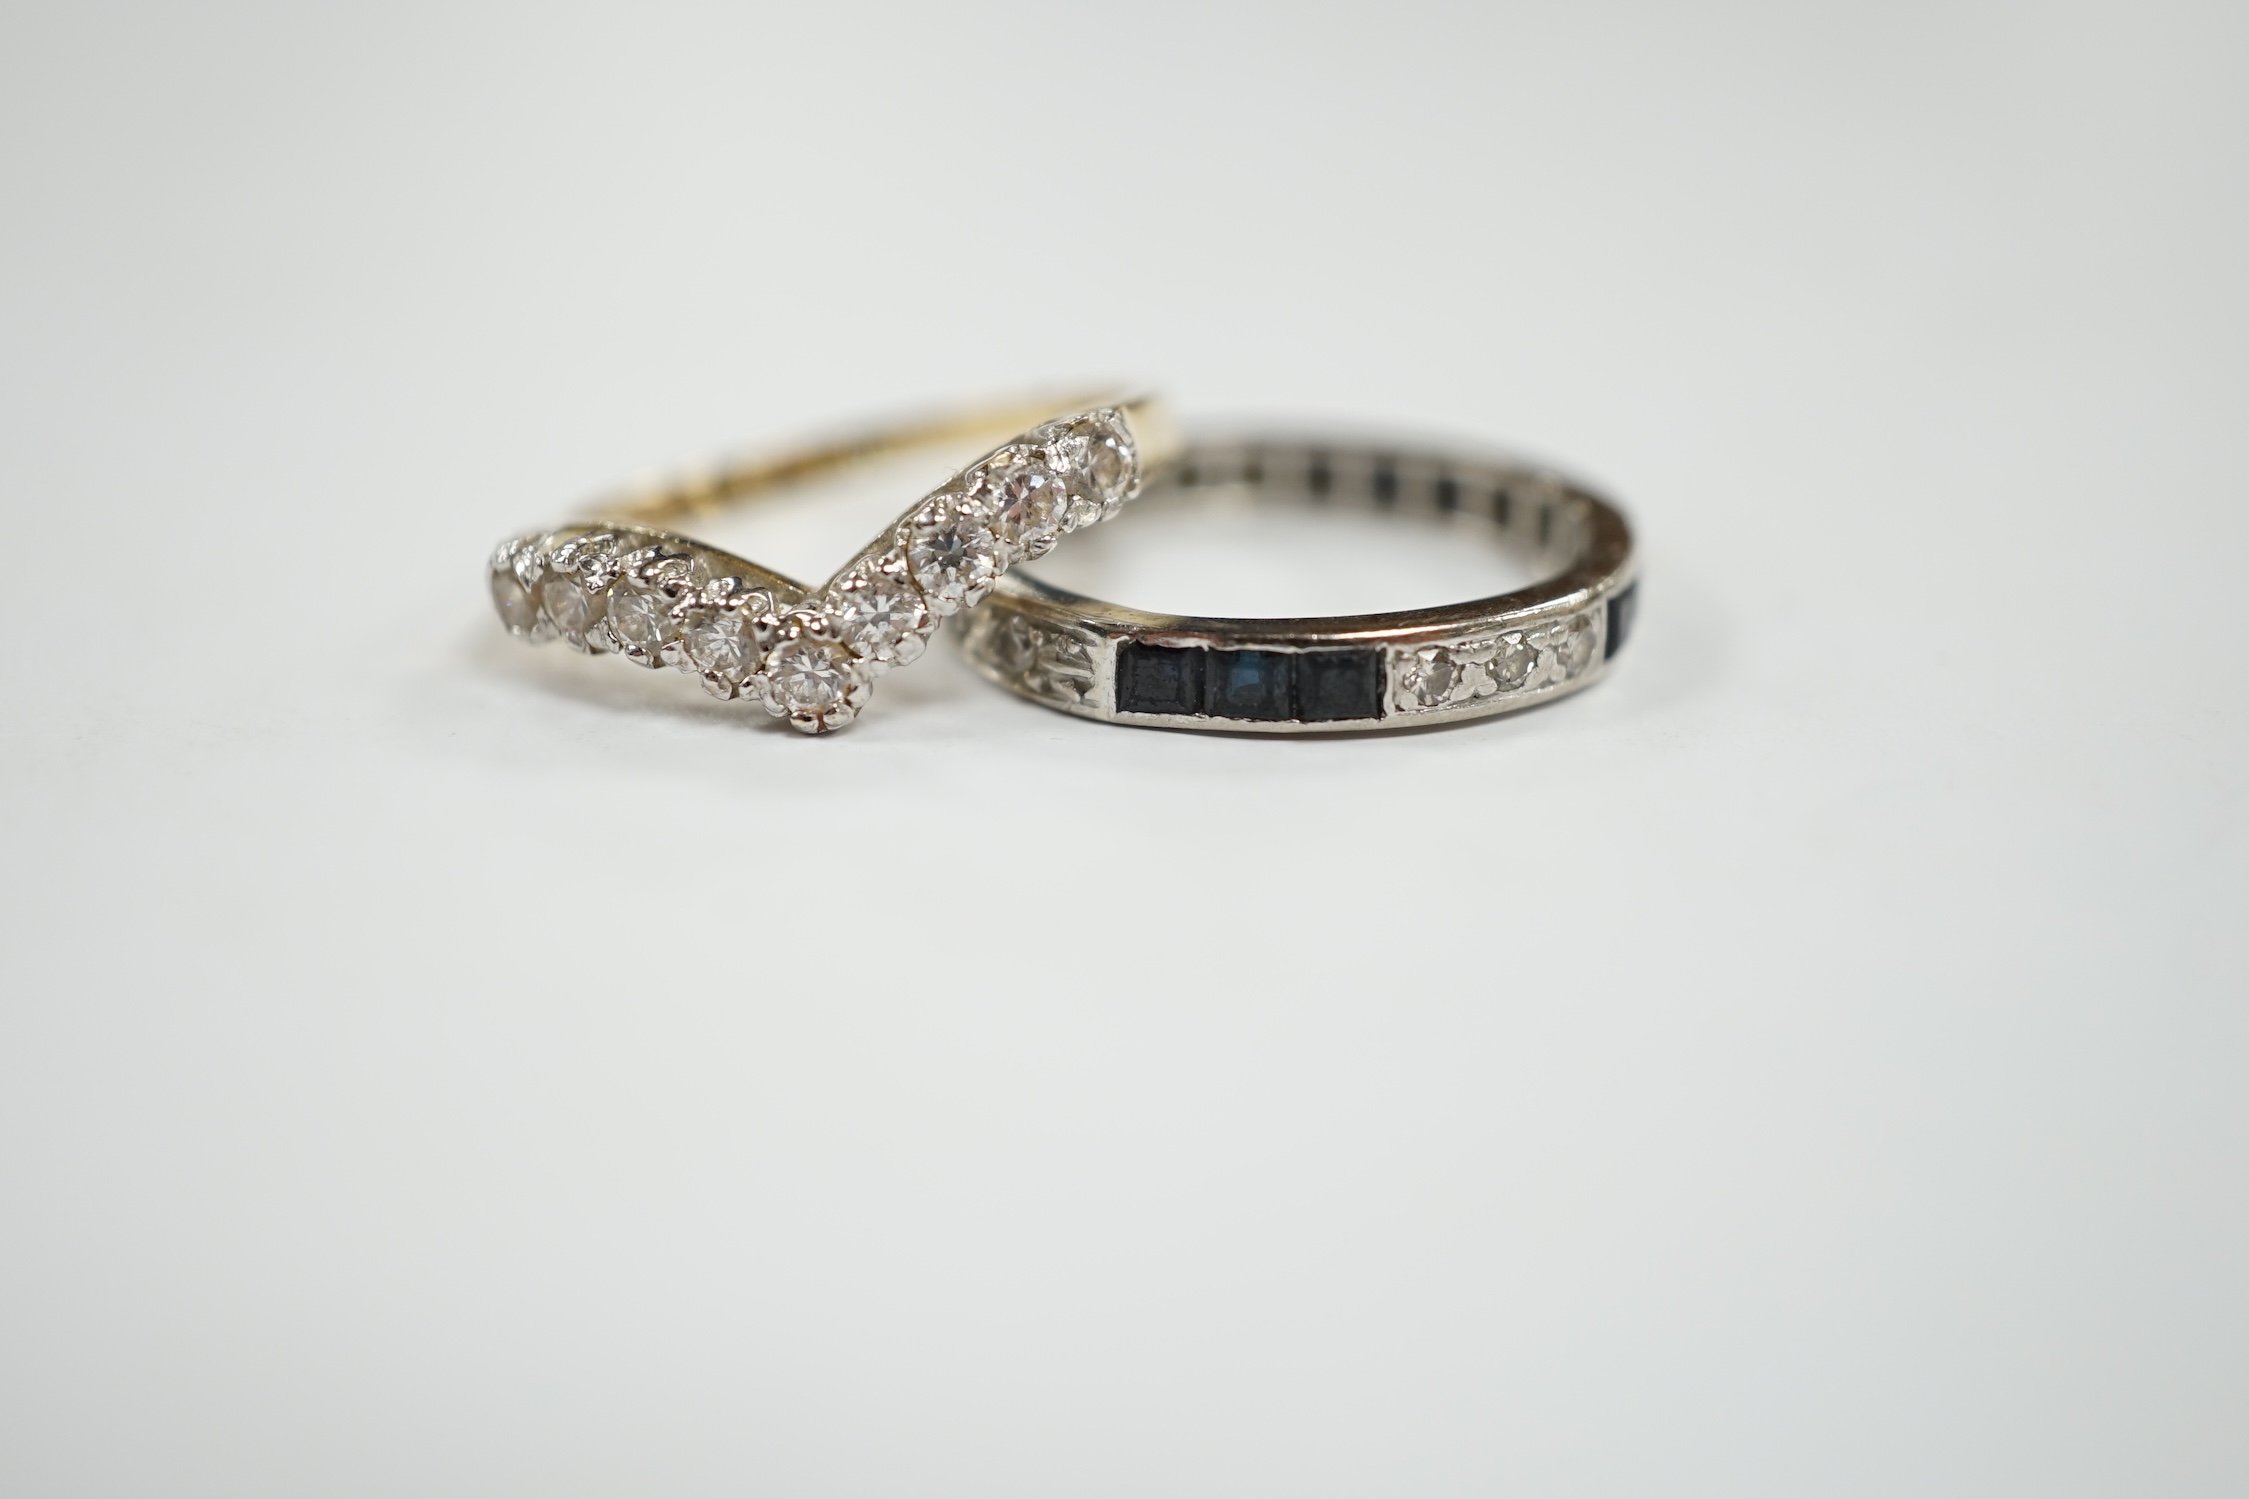 A white metal sapphire and diamond set full eternity ring, size Q/R, gross weight 3.6 grams, together with a 14k and cubic zirconia set chevron ring, gross 2.8 grams. Condition - fair to poor